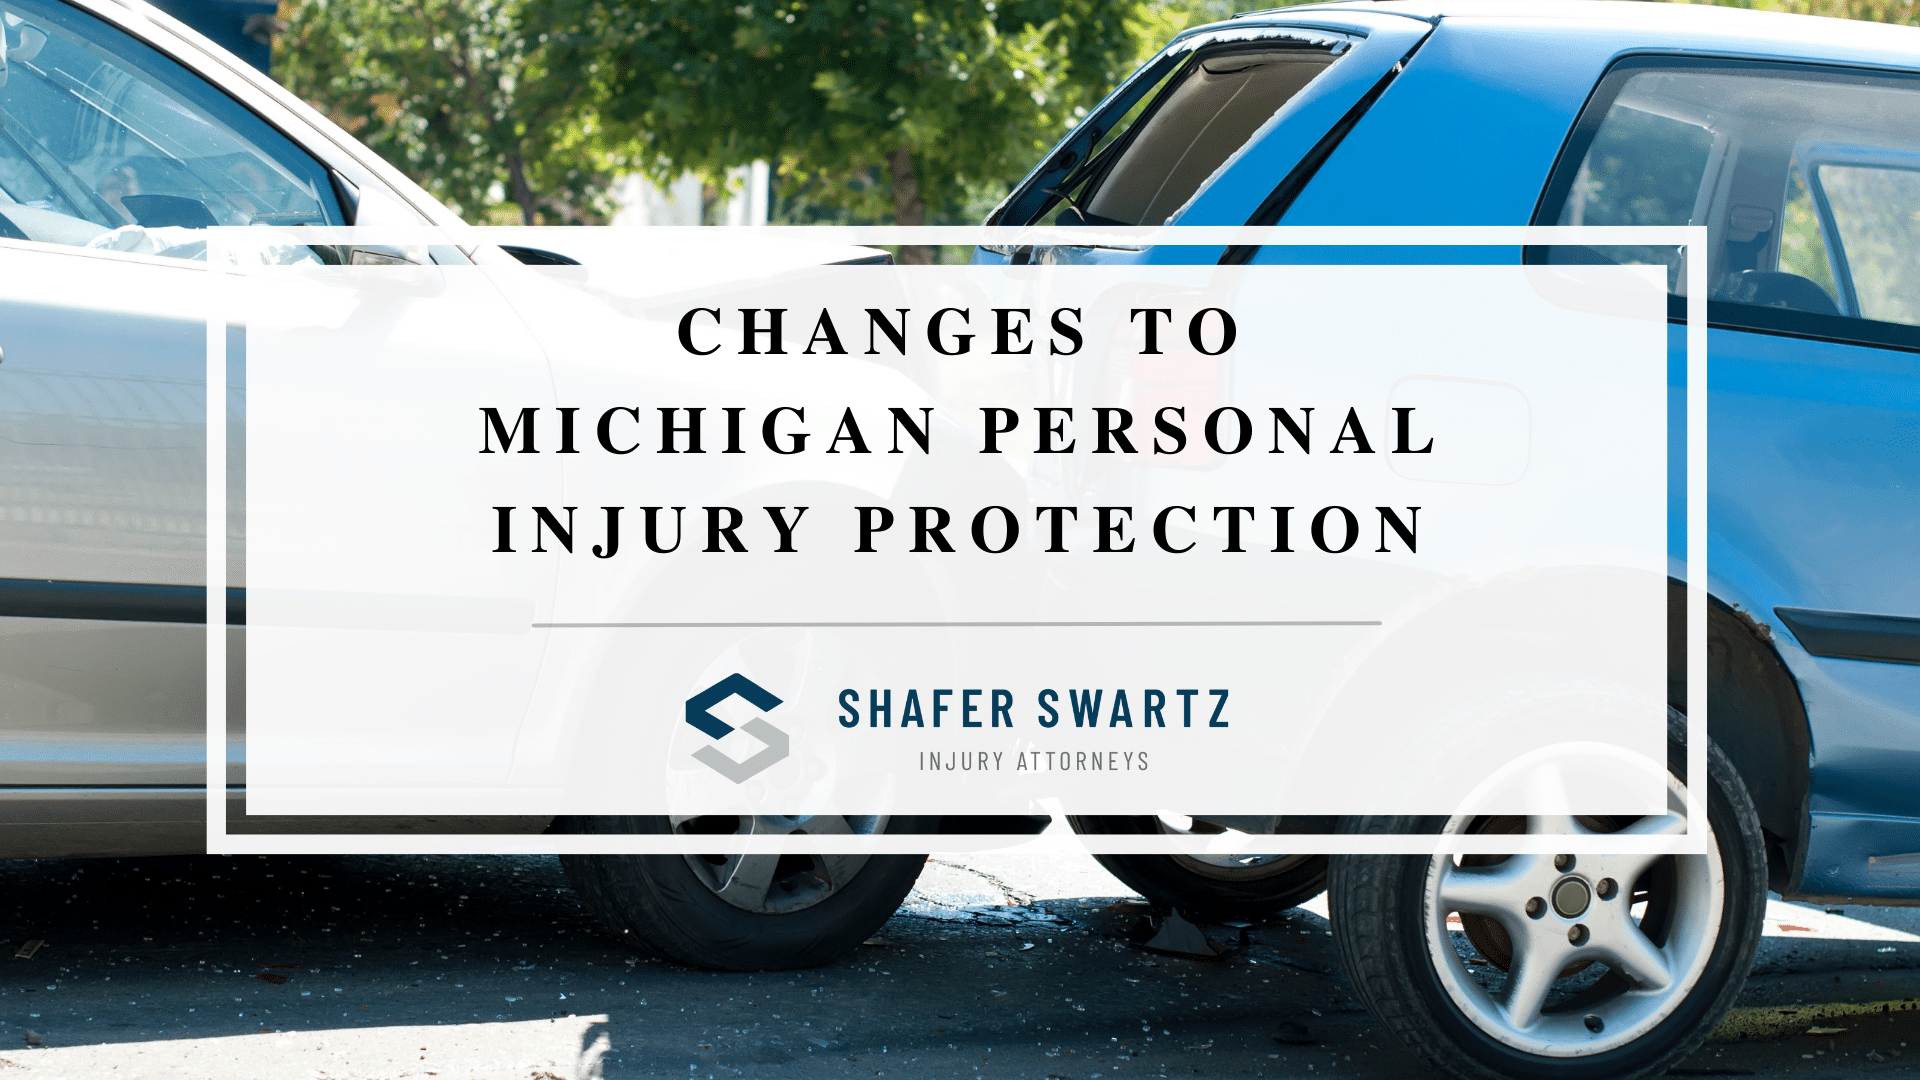 Featured image of Changes to Michigan Personal Injury Protection